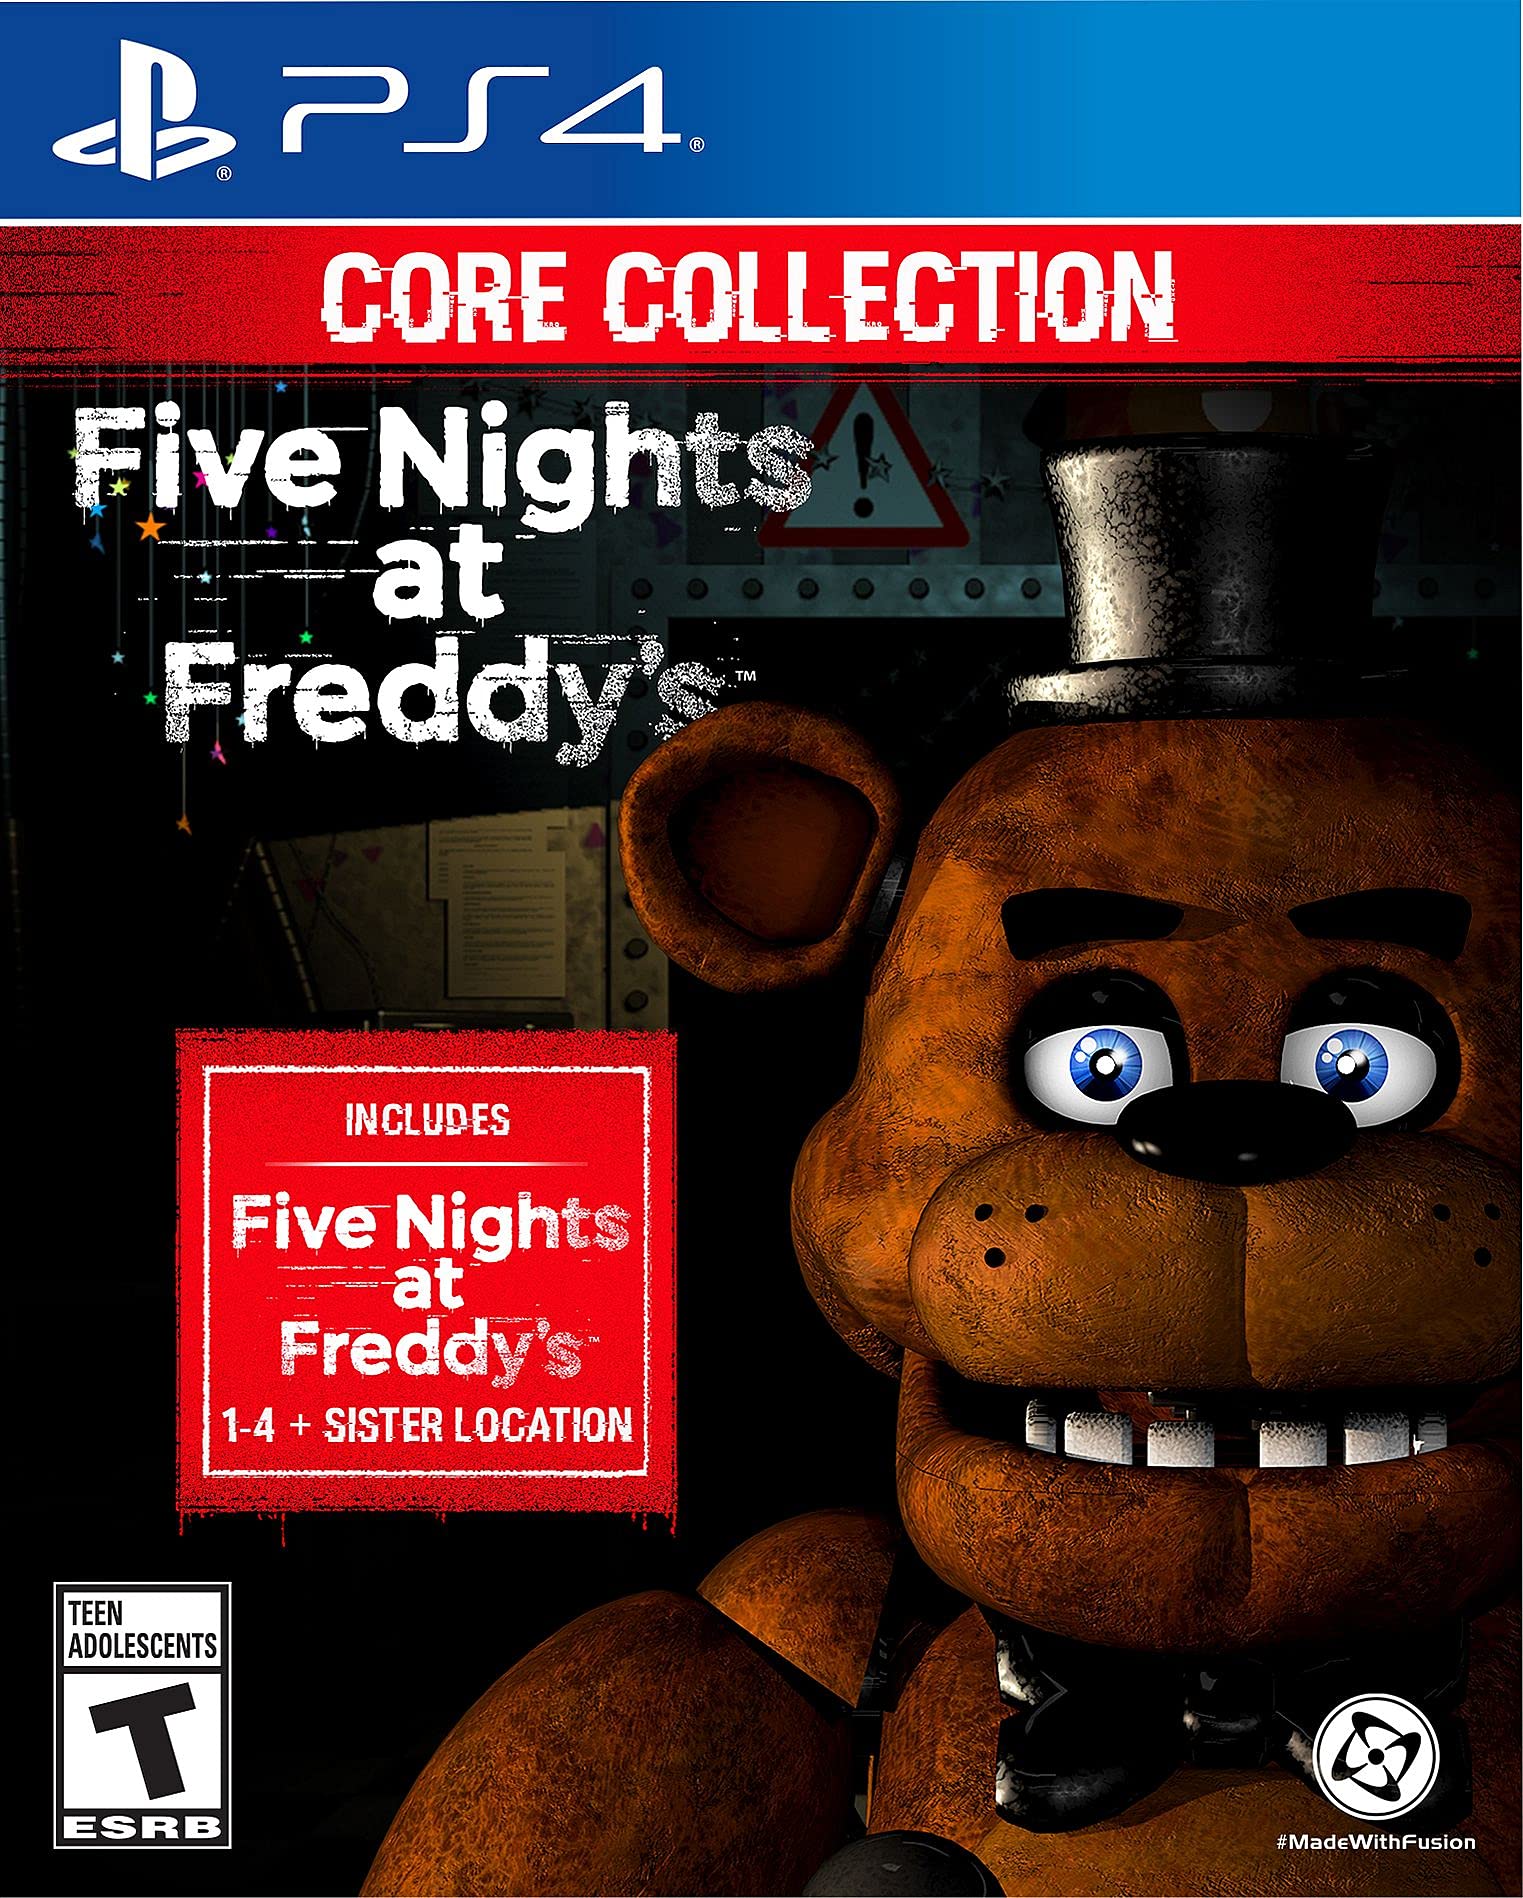 Five Nights at Freddy's: The Core Collection (輸入版:北米) - PS4